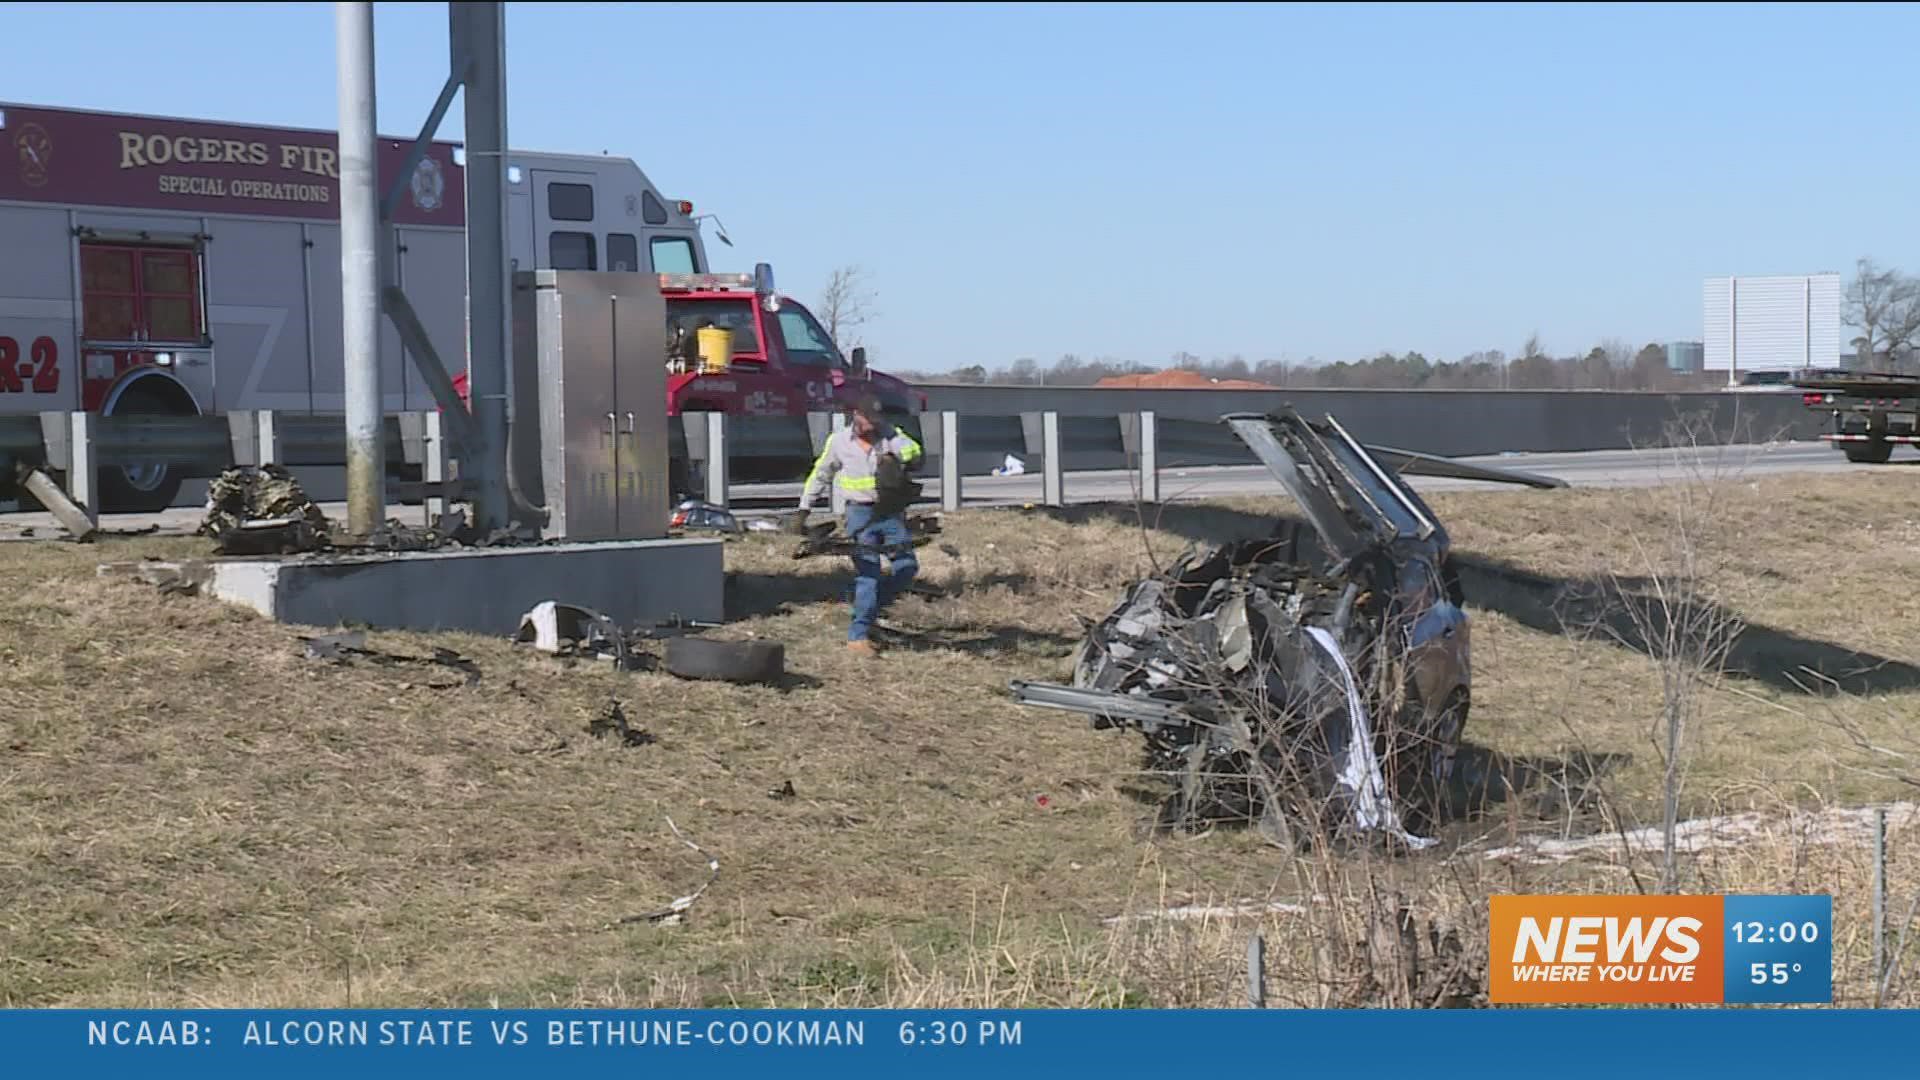 At least one person is dead after a vehicle crashed and caught fire on I-49 in Rogers Monday morning. Further details surrounding the crash have not been released.